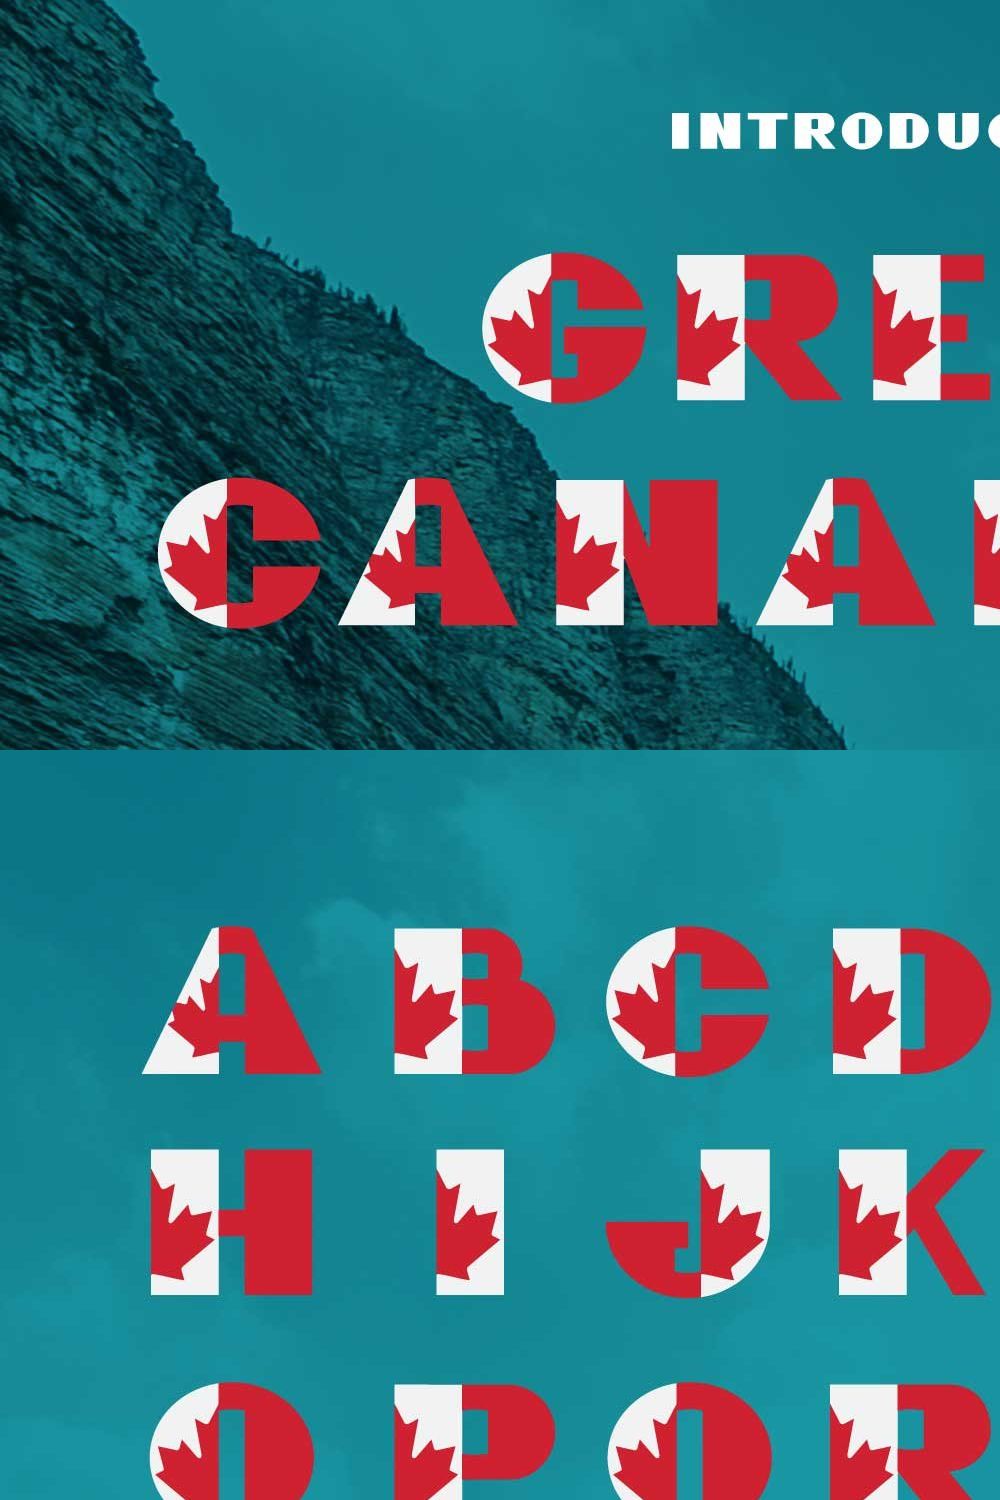 GreatCanadian-font family pinterest preview image.